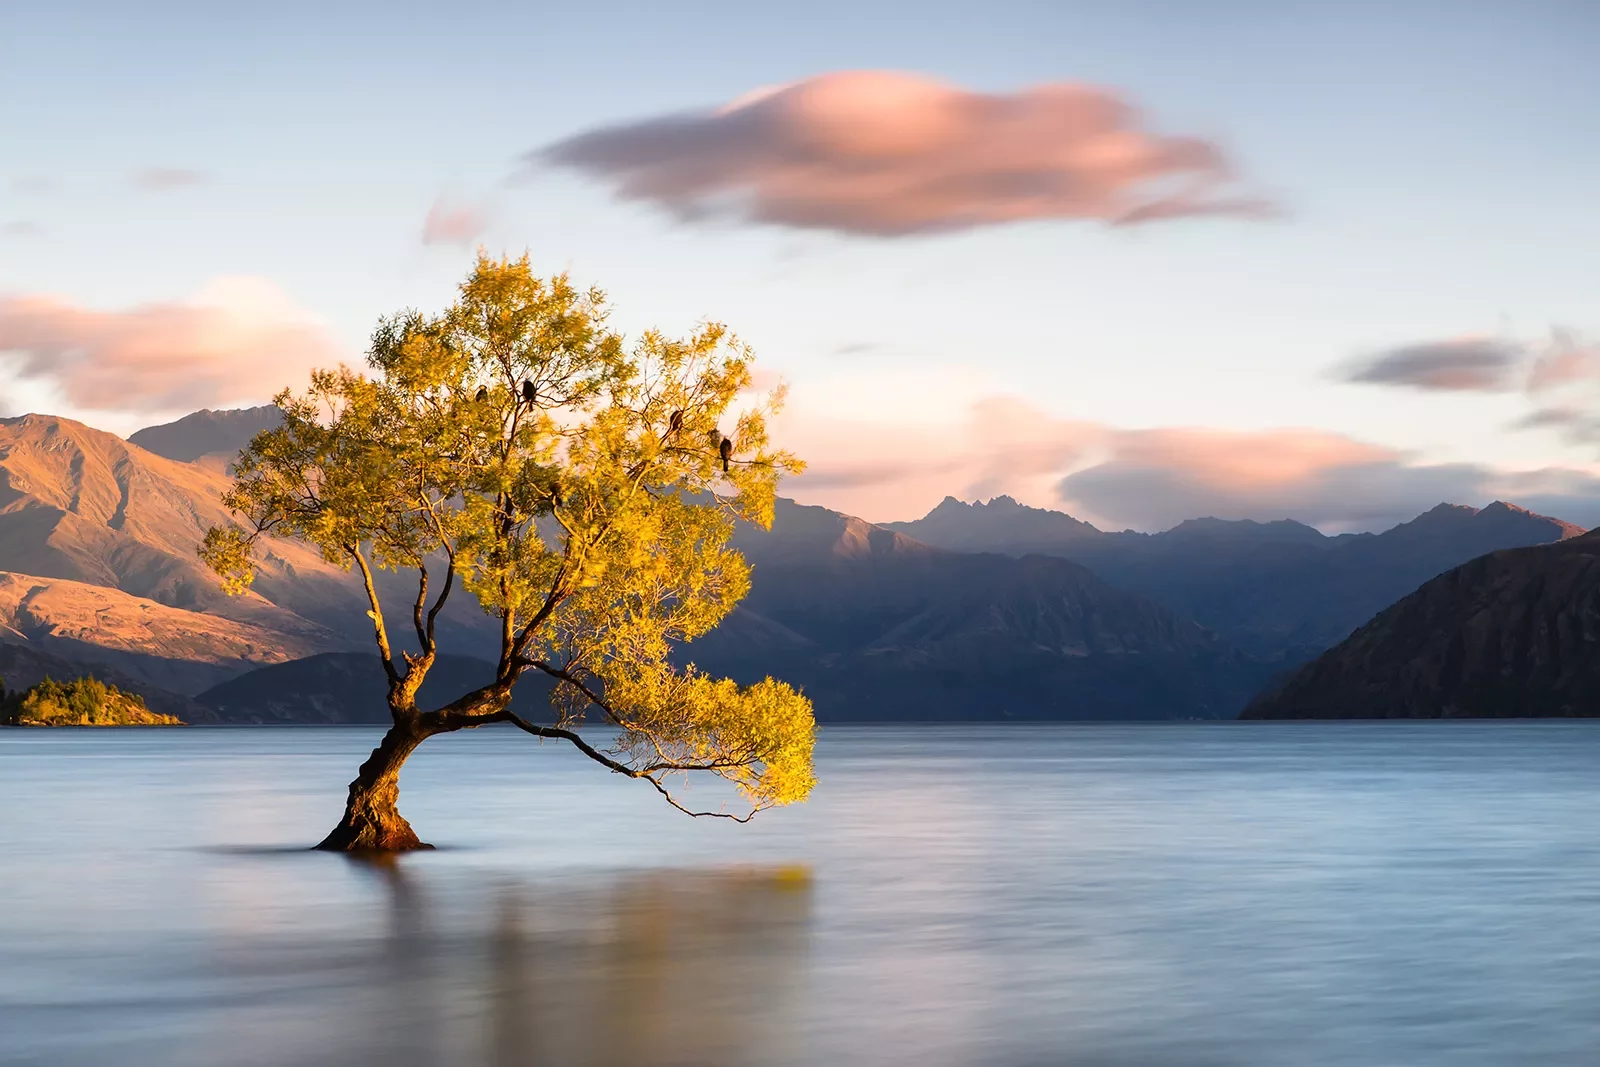 Lone tree in a lake in New Zealand